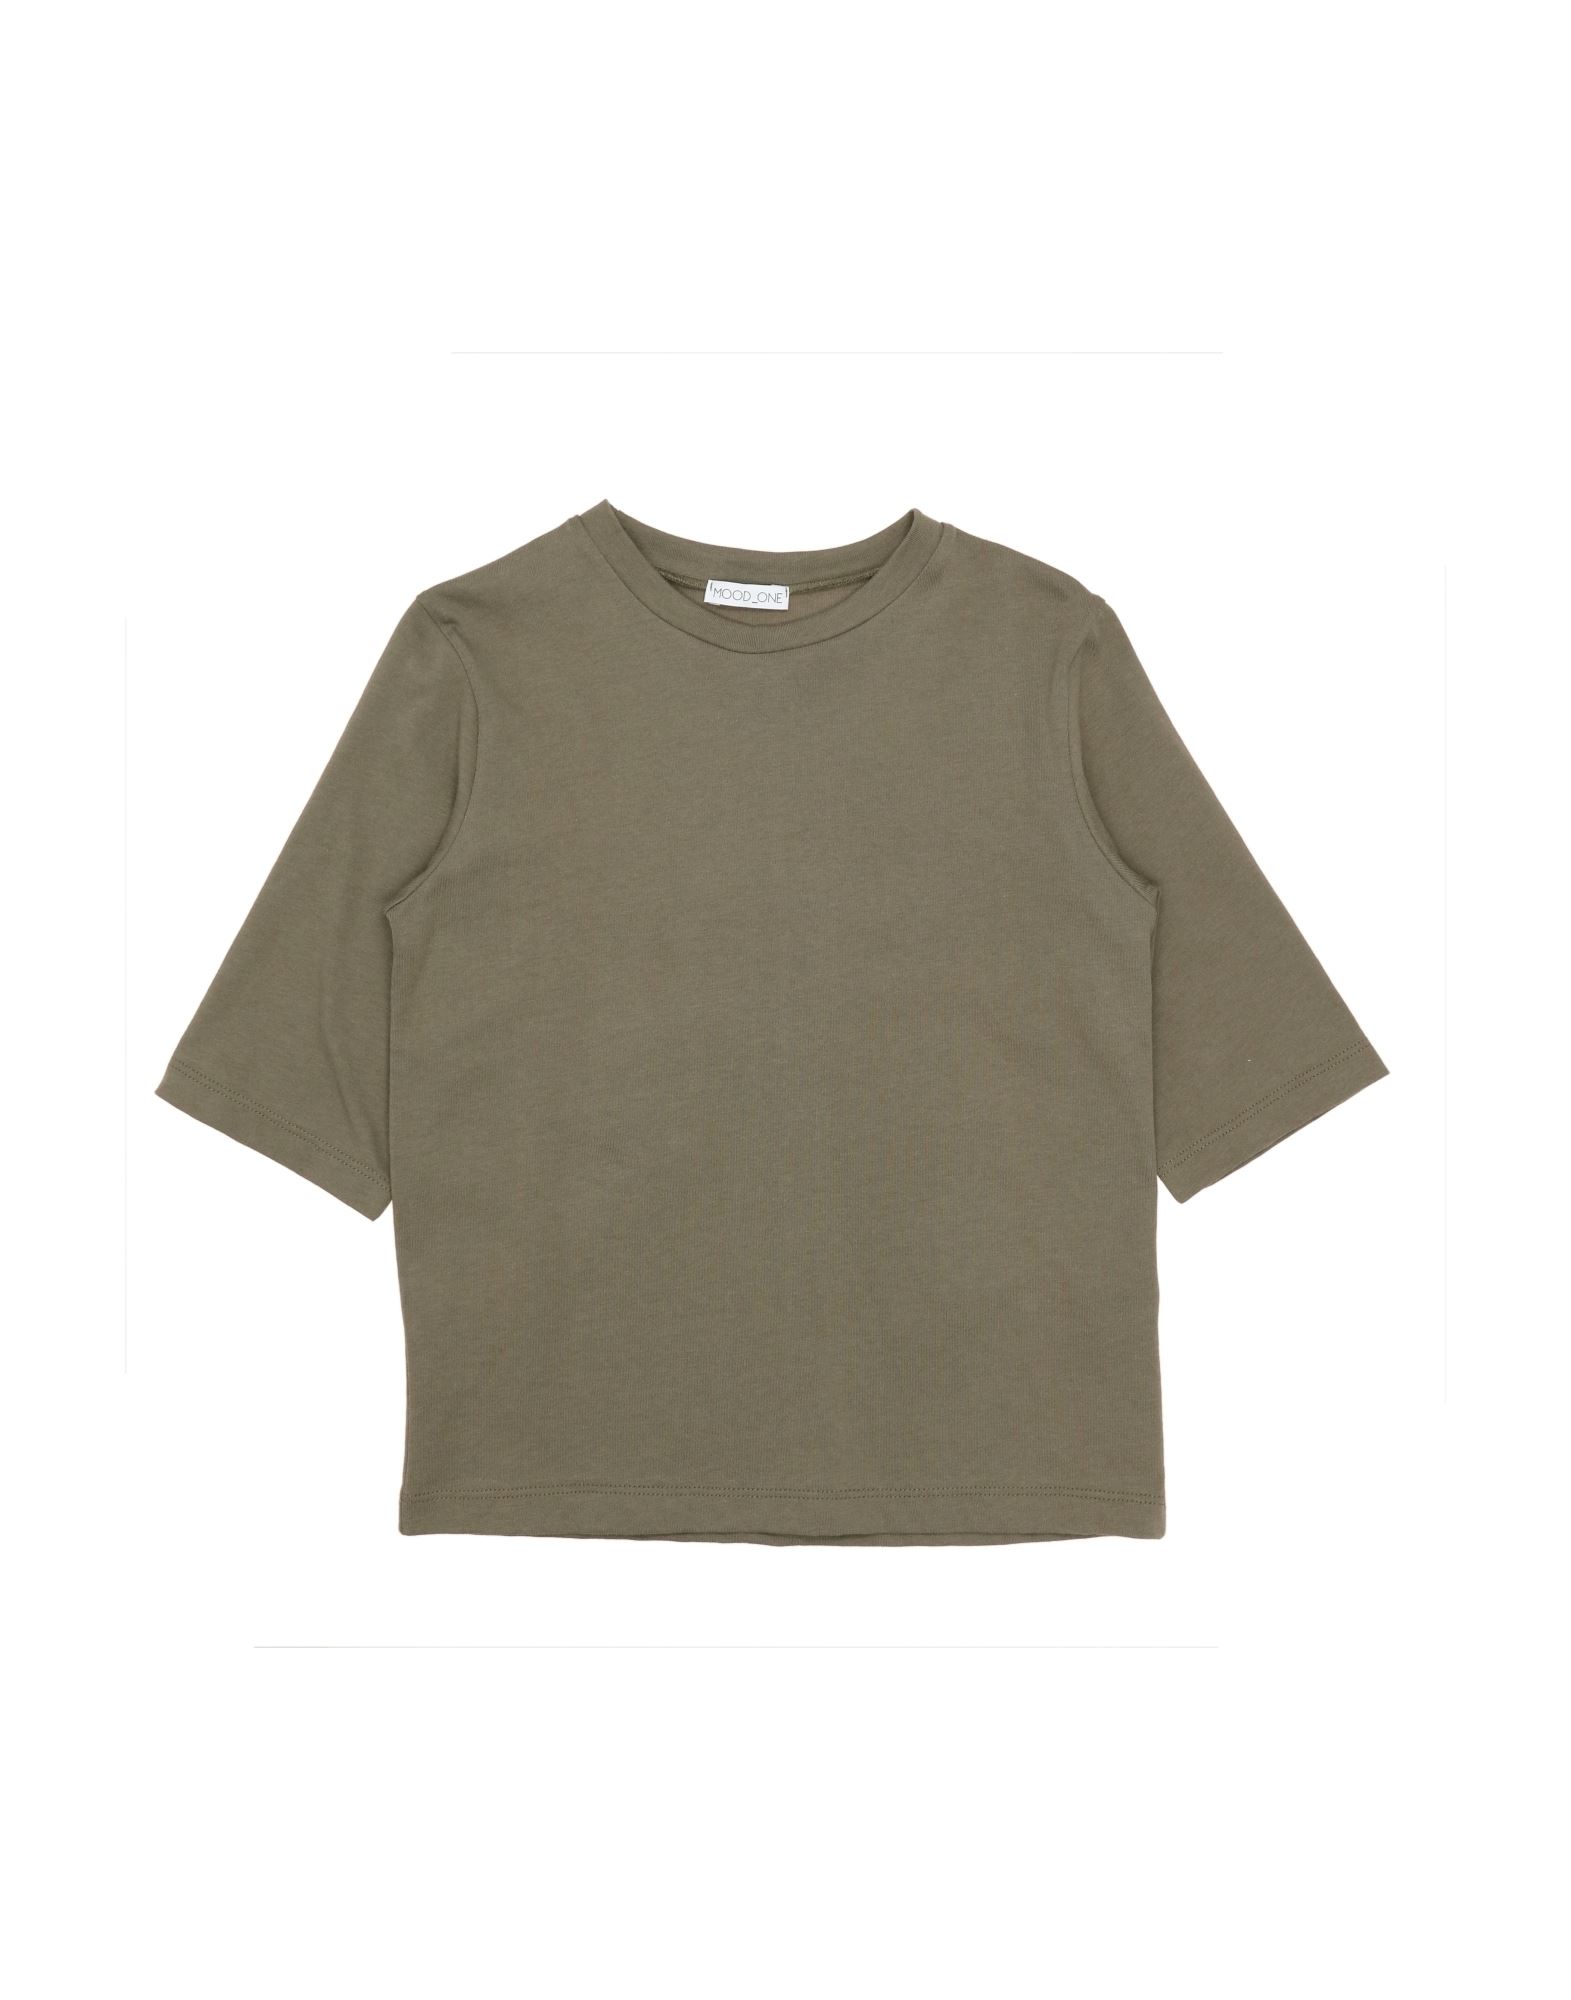 Mood One Kids' T-shirts In Military Green